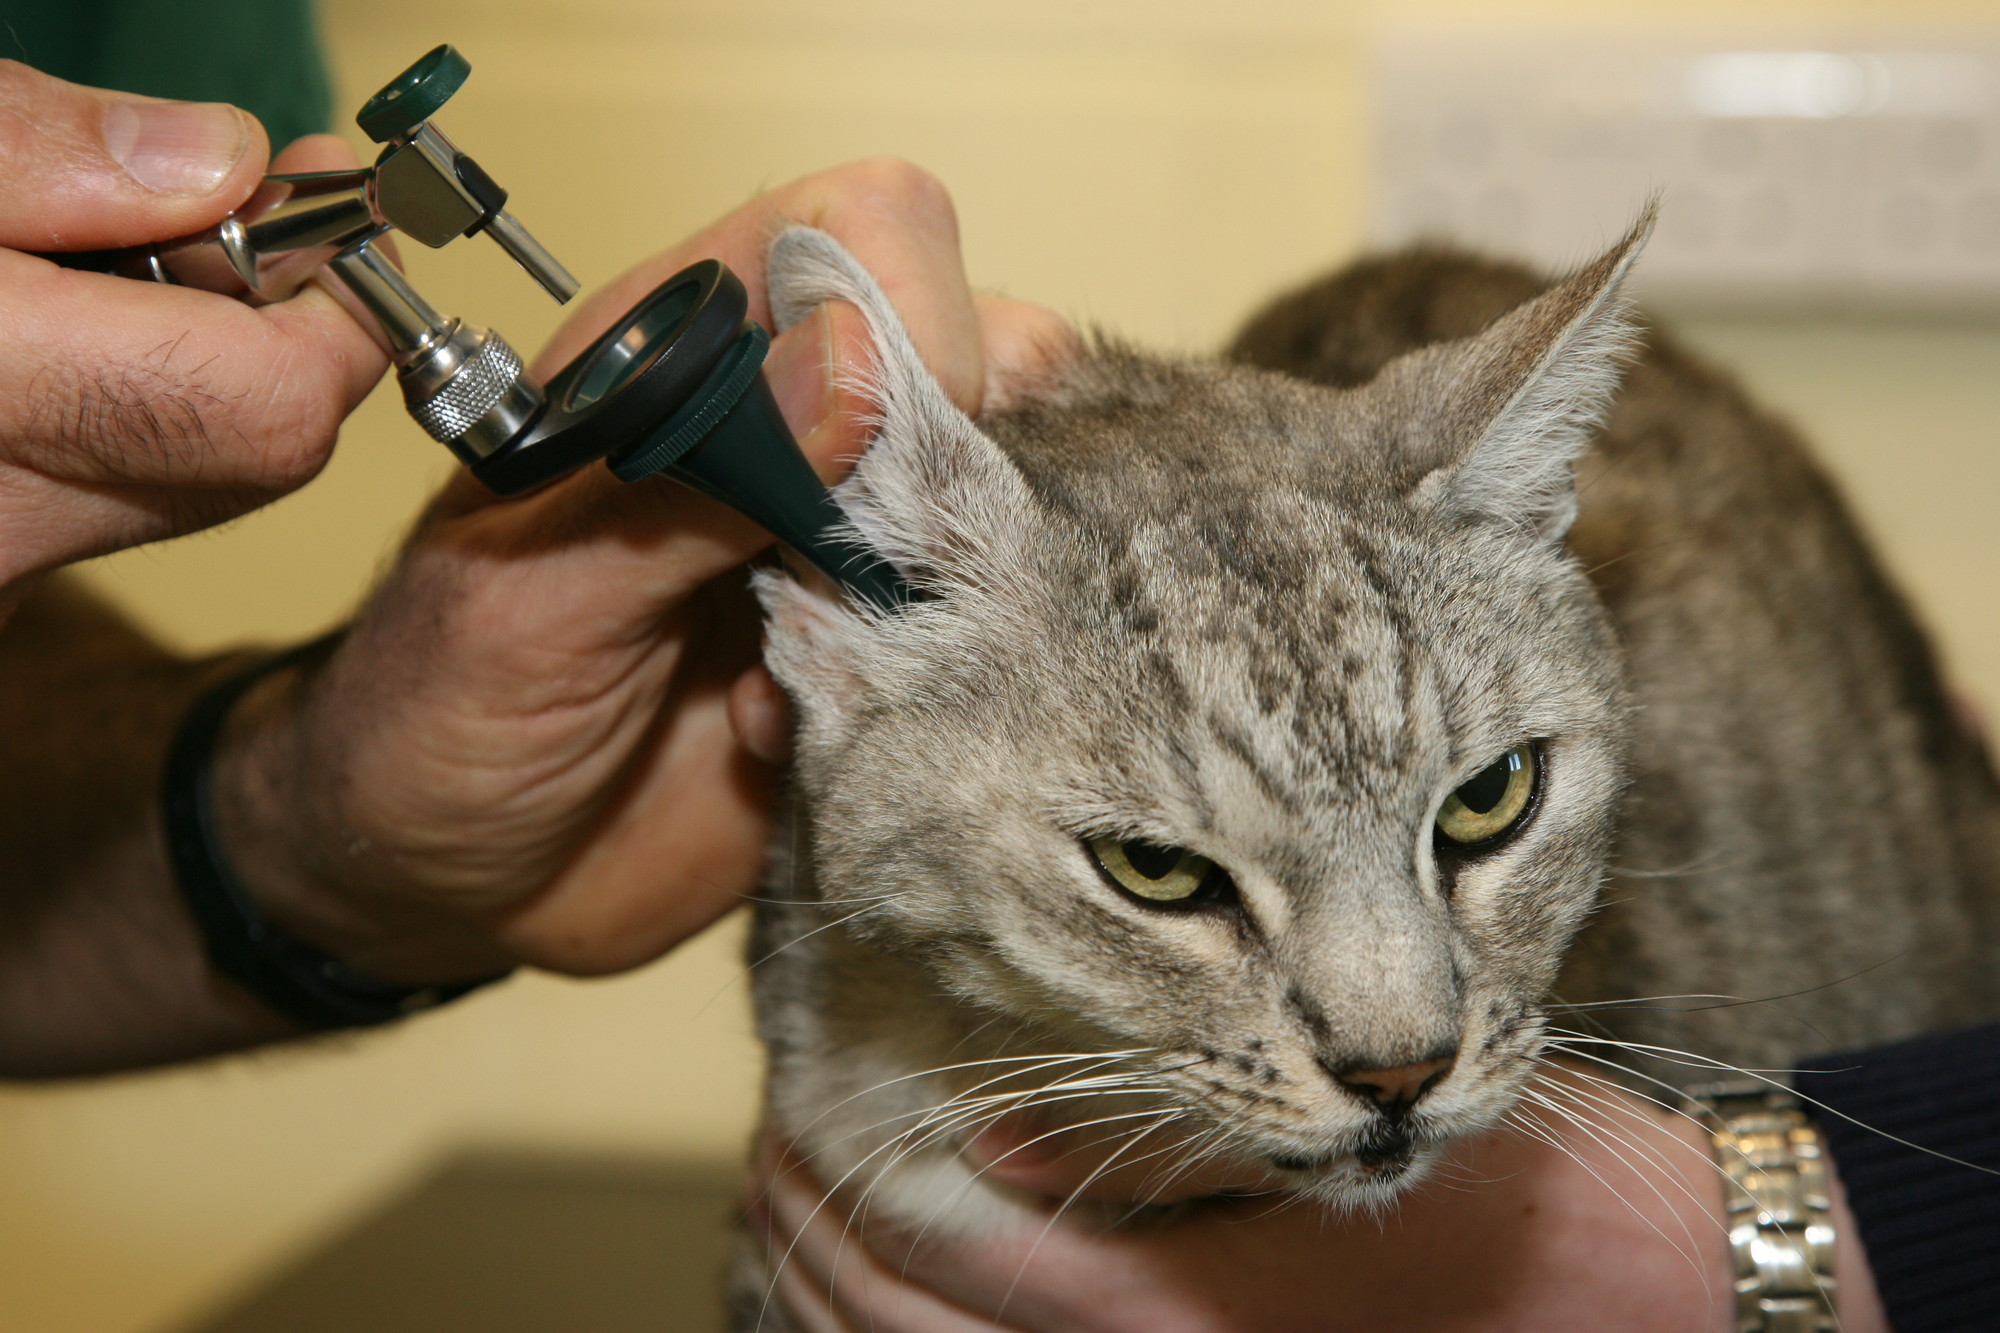 best ear mite medicine for cats